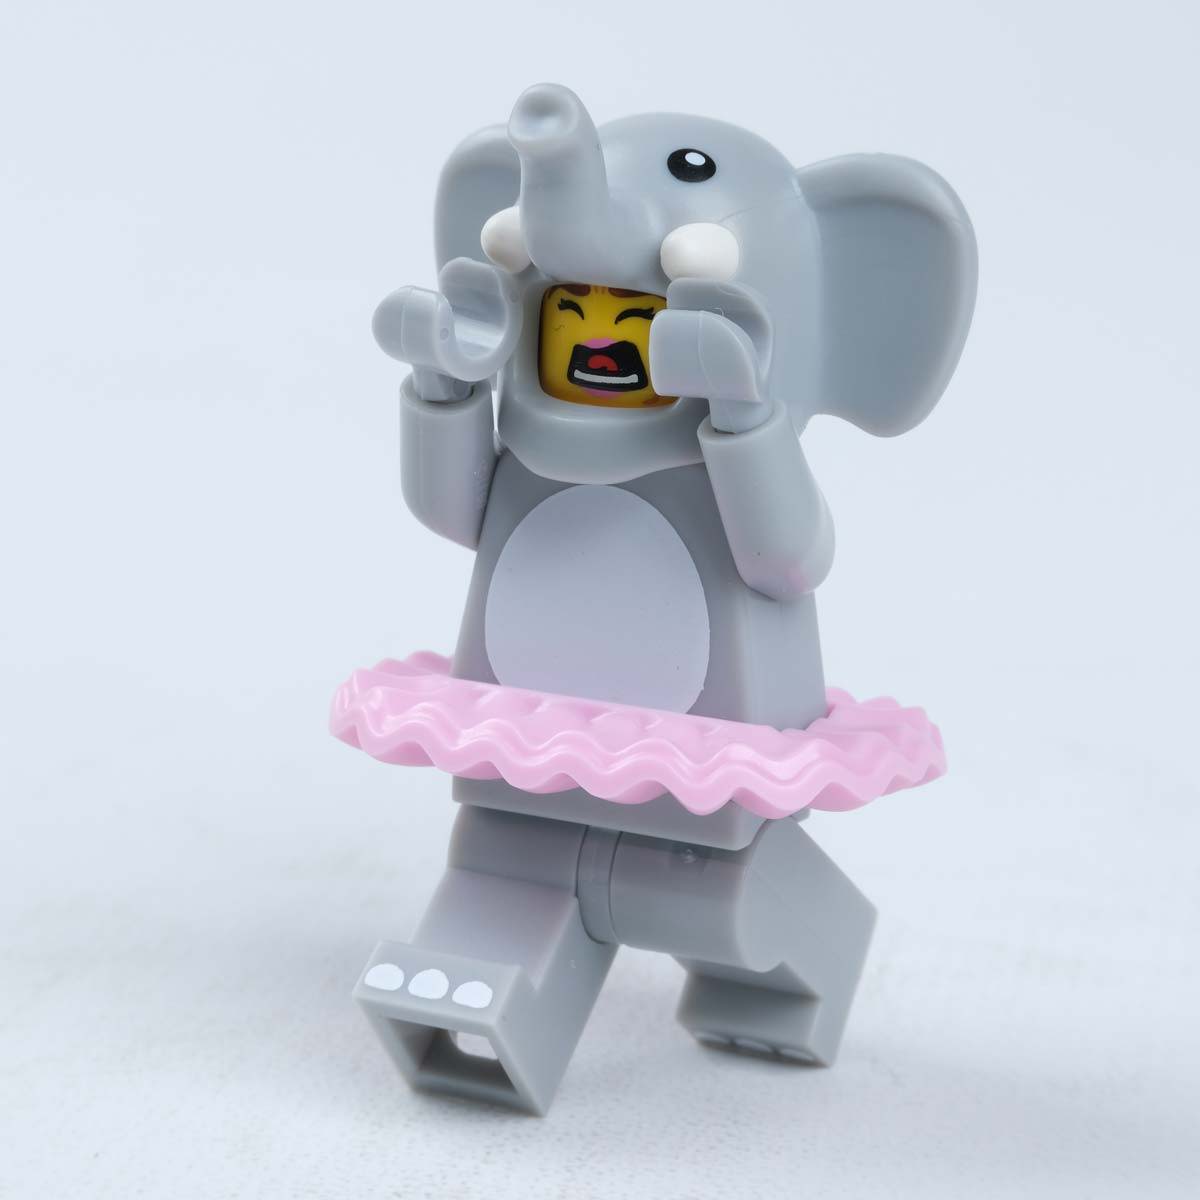 A lego person dresses up as an Elephant in a Tutu running away crying